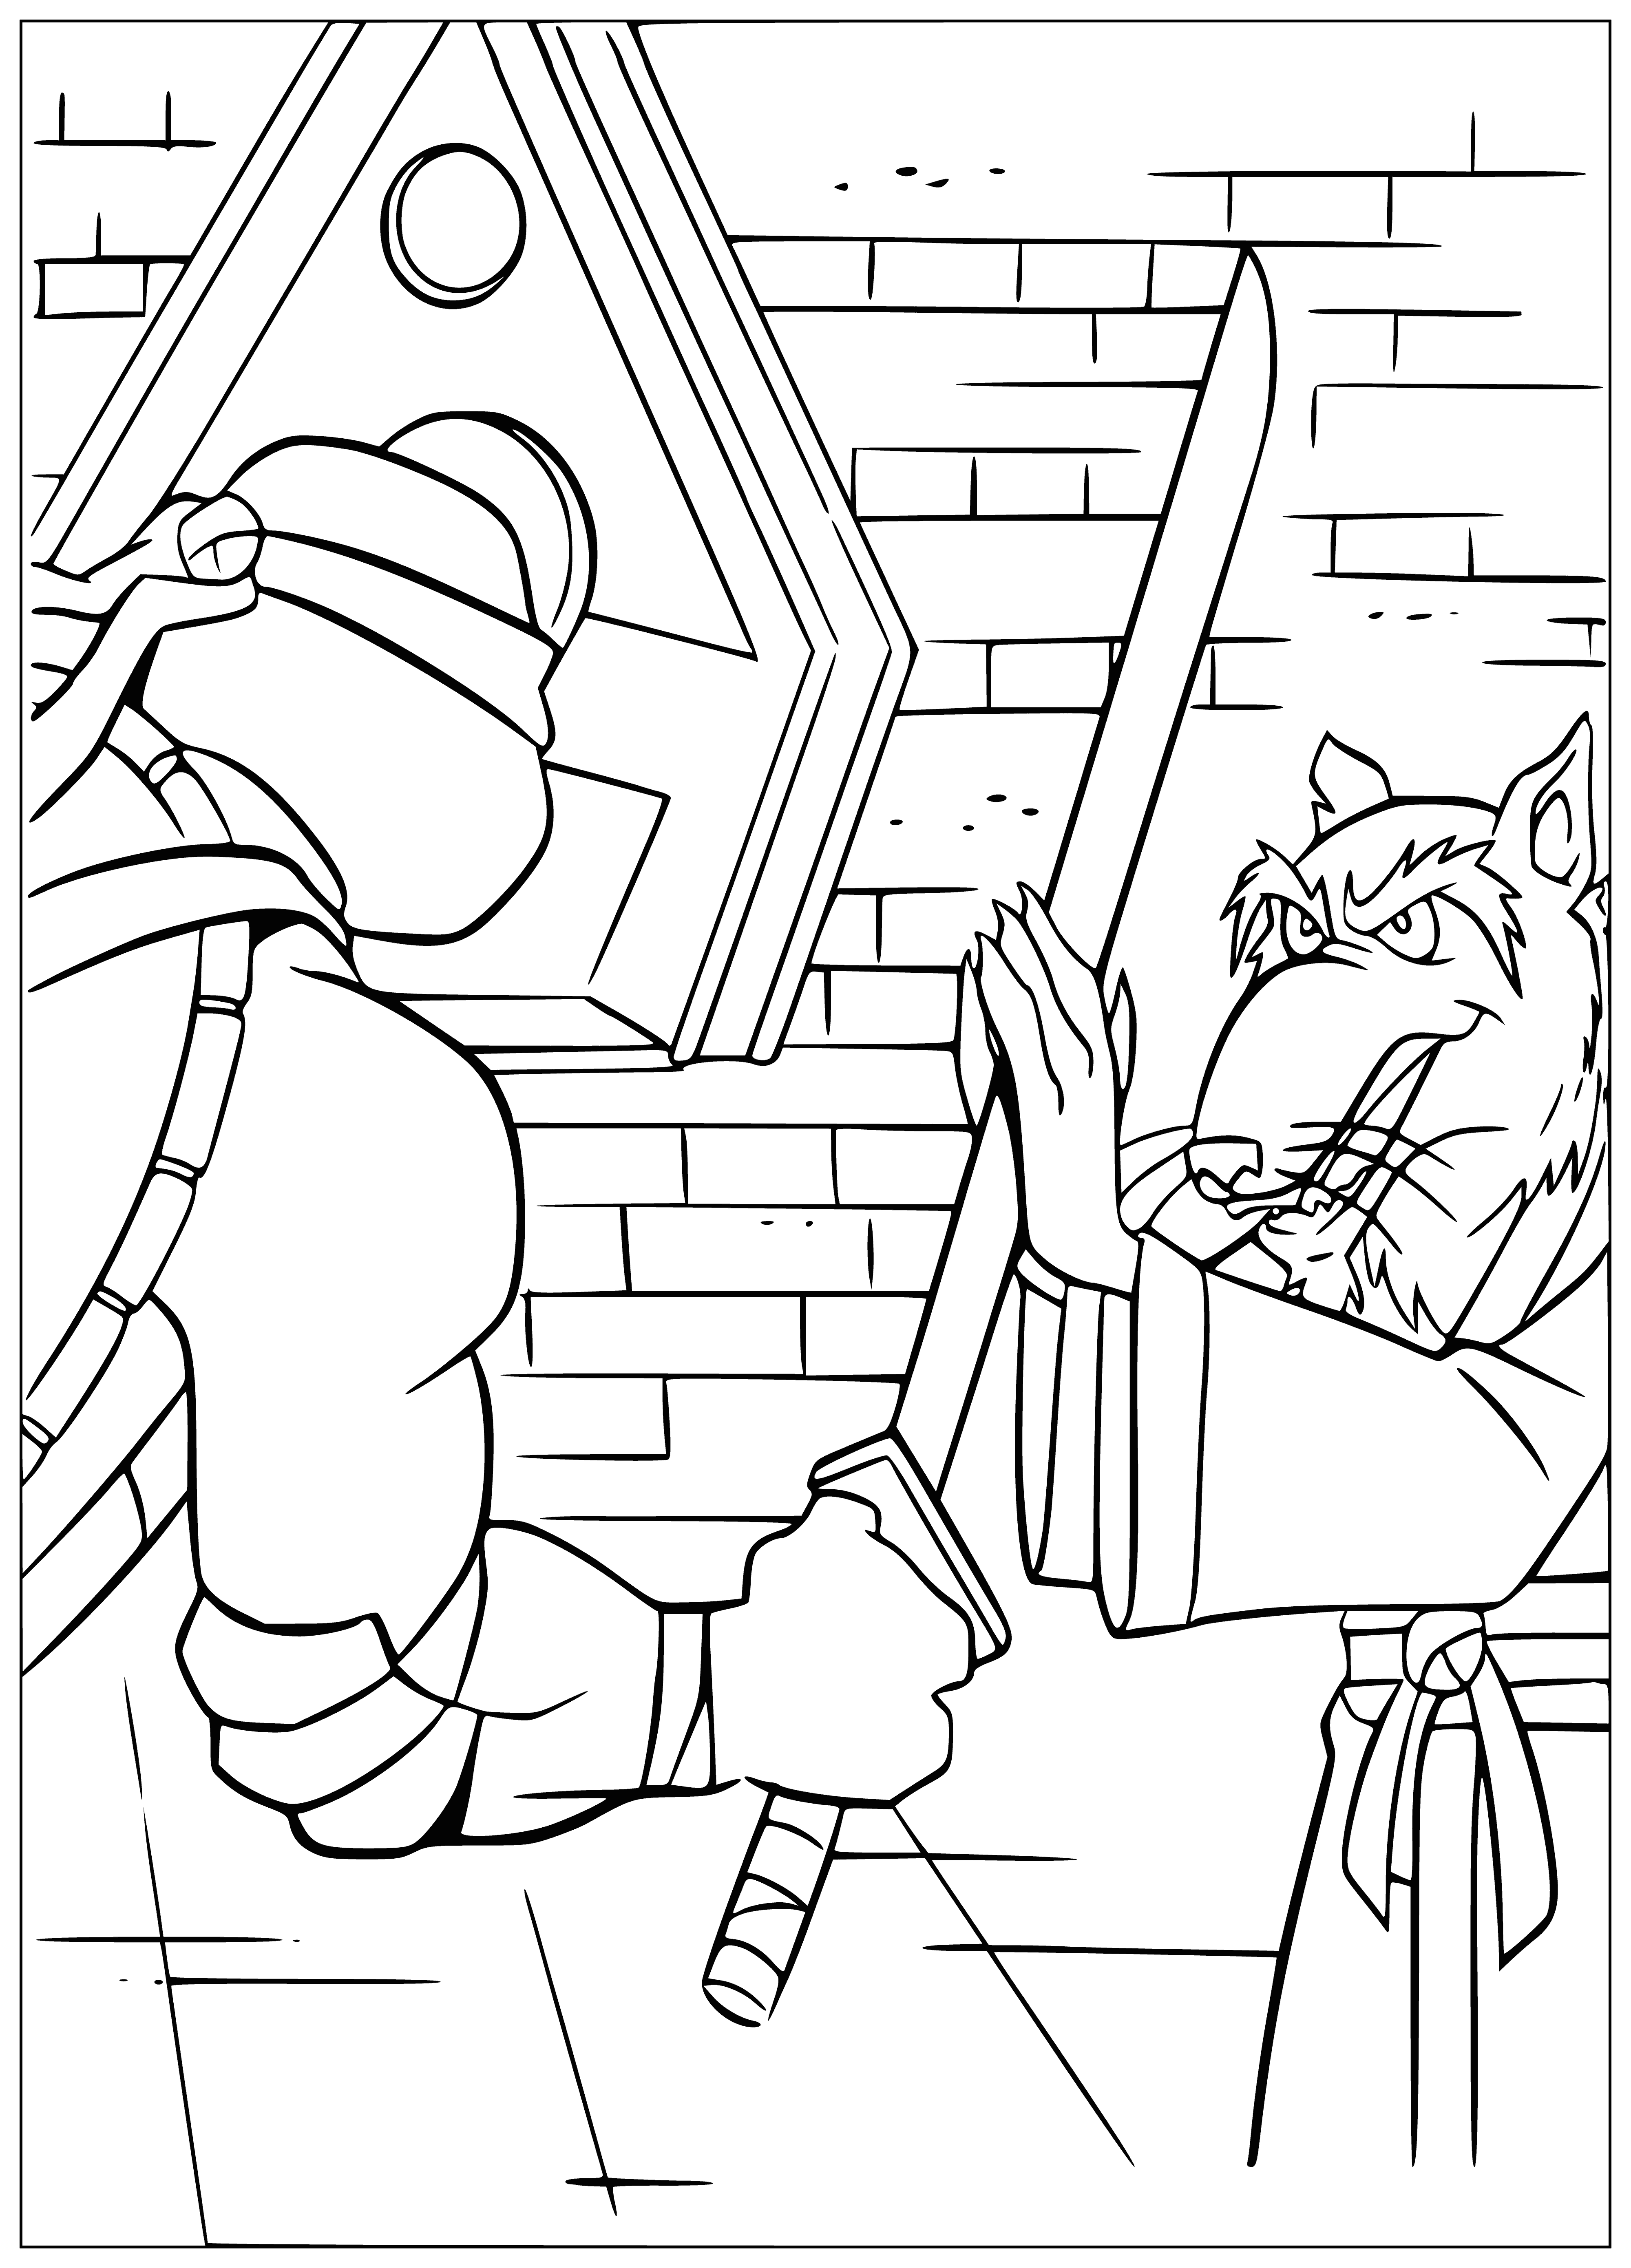 coloring page: Turtle w/club & mask, 4 small turtles w/masks, swords, 1 red, 1 blue, 1 purple shell.